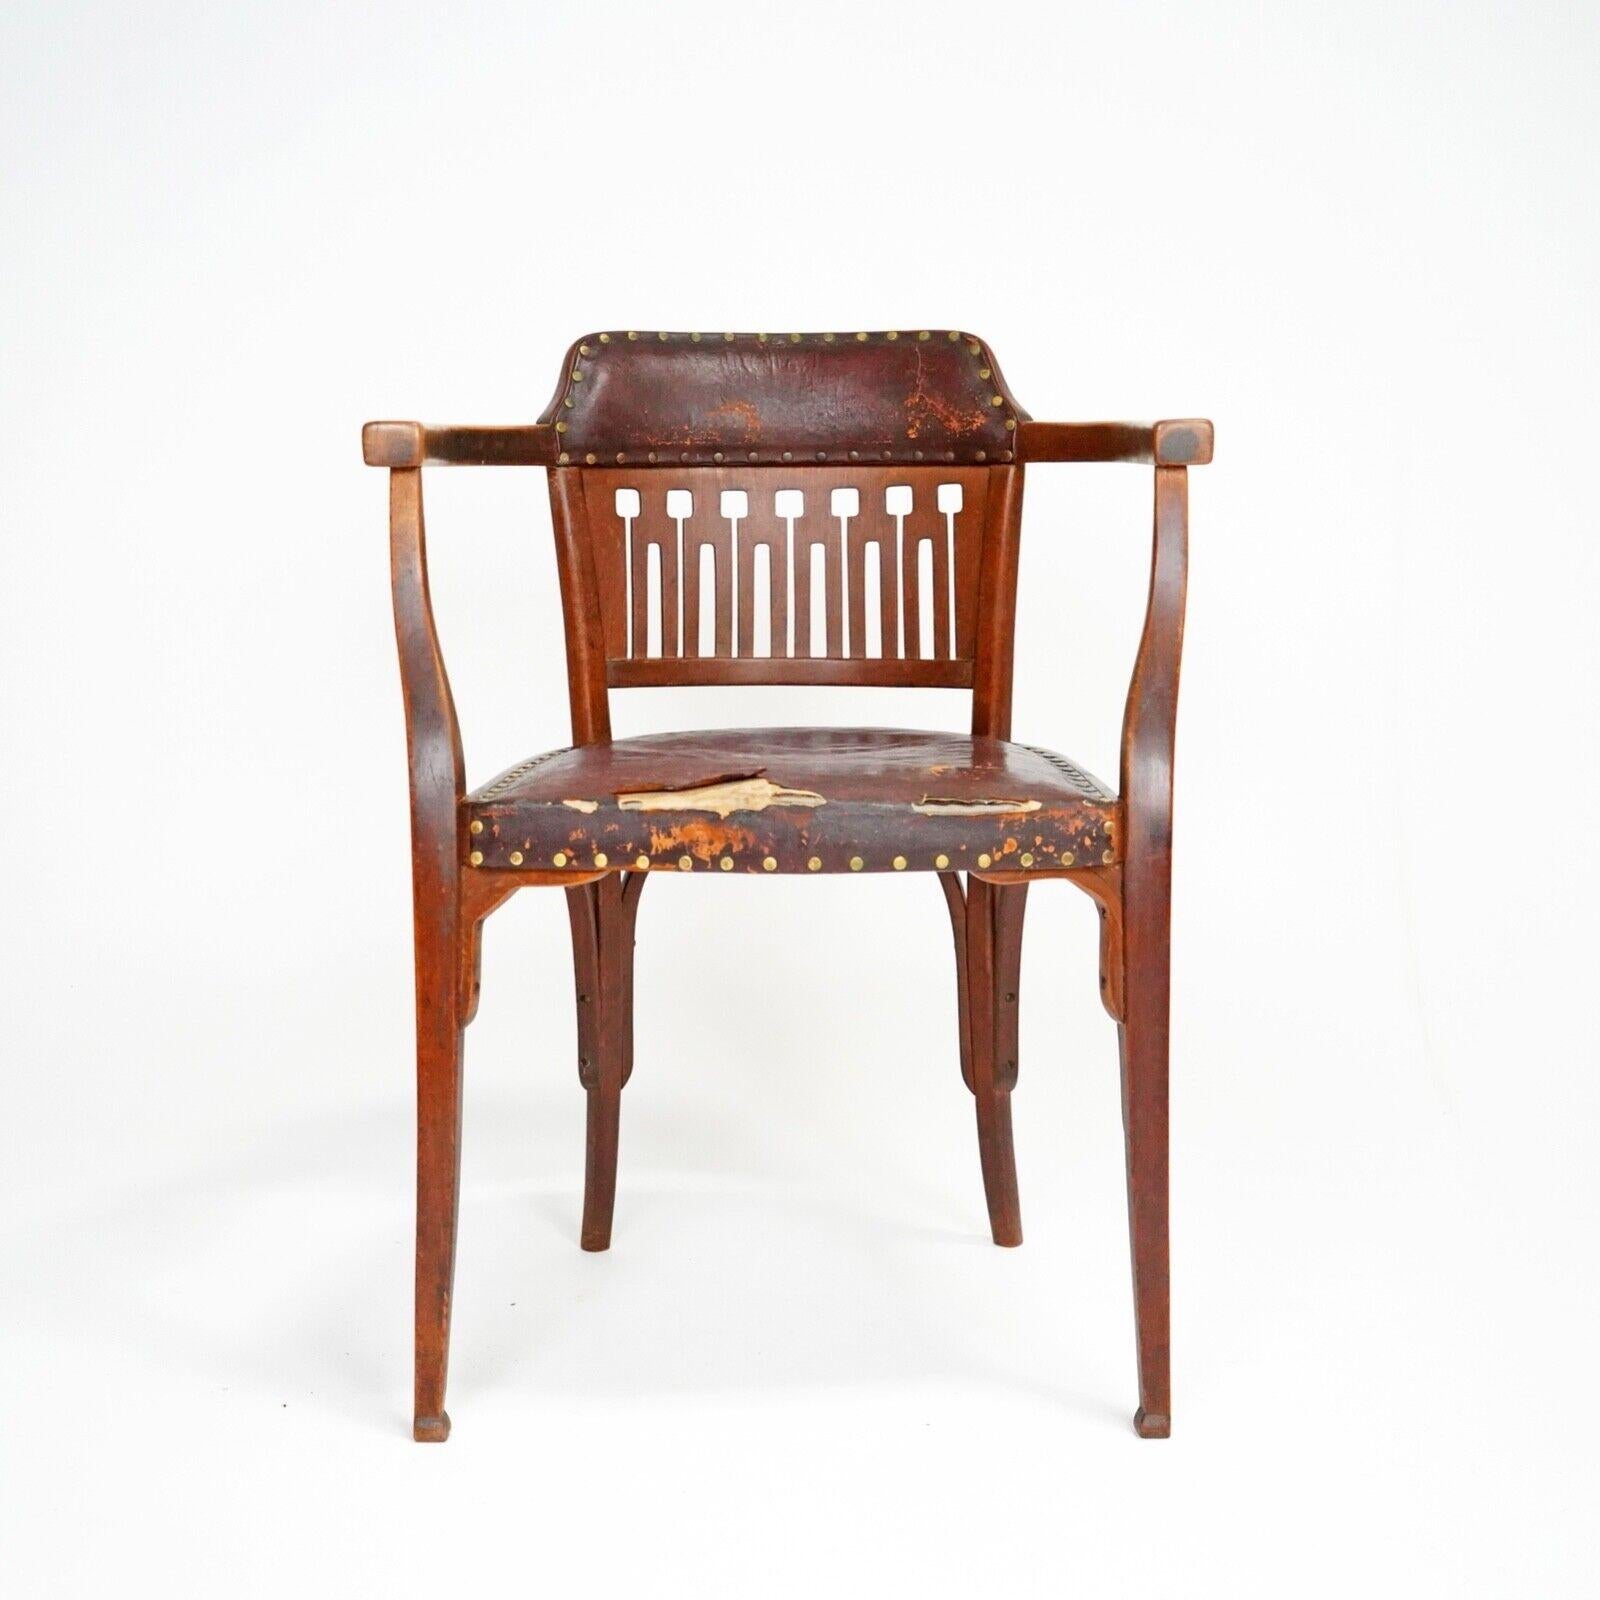 Jacob & Josef Kohn bentwood chair No.714 attributed to Otto Wagner. Otto Wagner was a leading figure in the Viennese Succession movement. The Viennese succession is an art movement formed in 1897 by a group of Austrian artists, closely related to